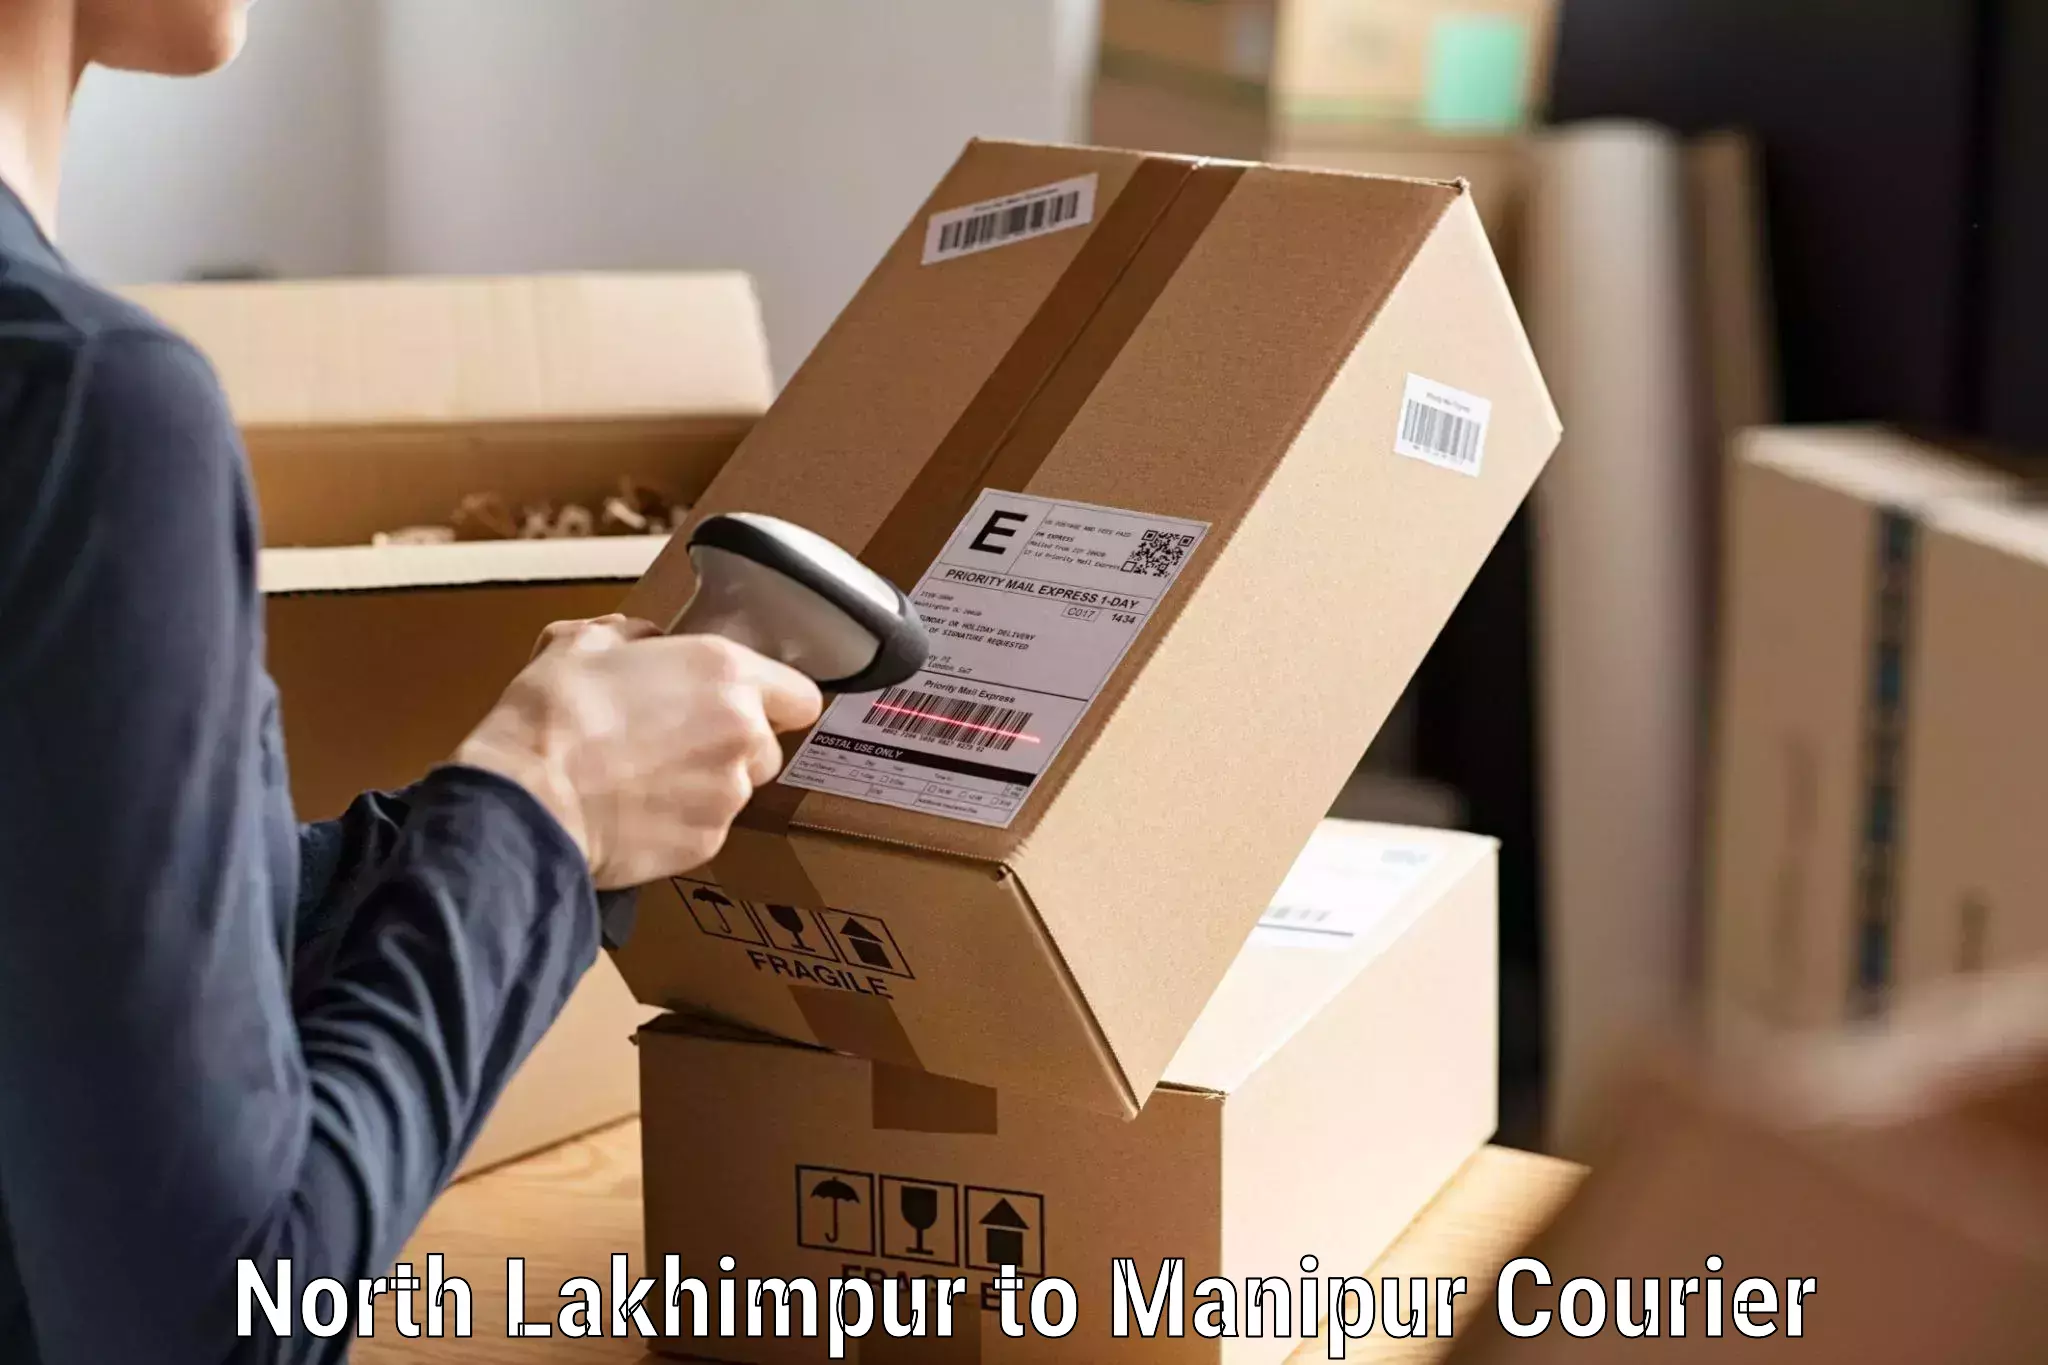 Personal courier services in North Lakhimpur to Tamenglong